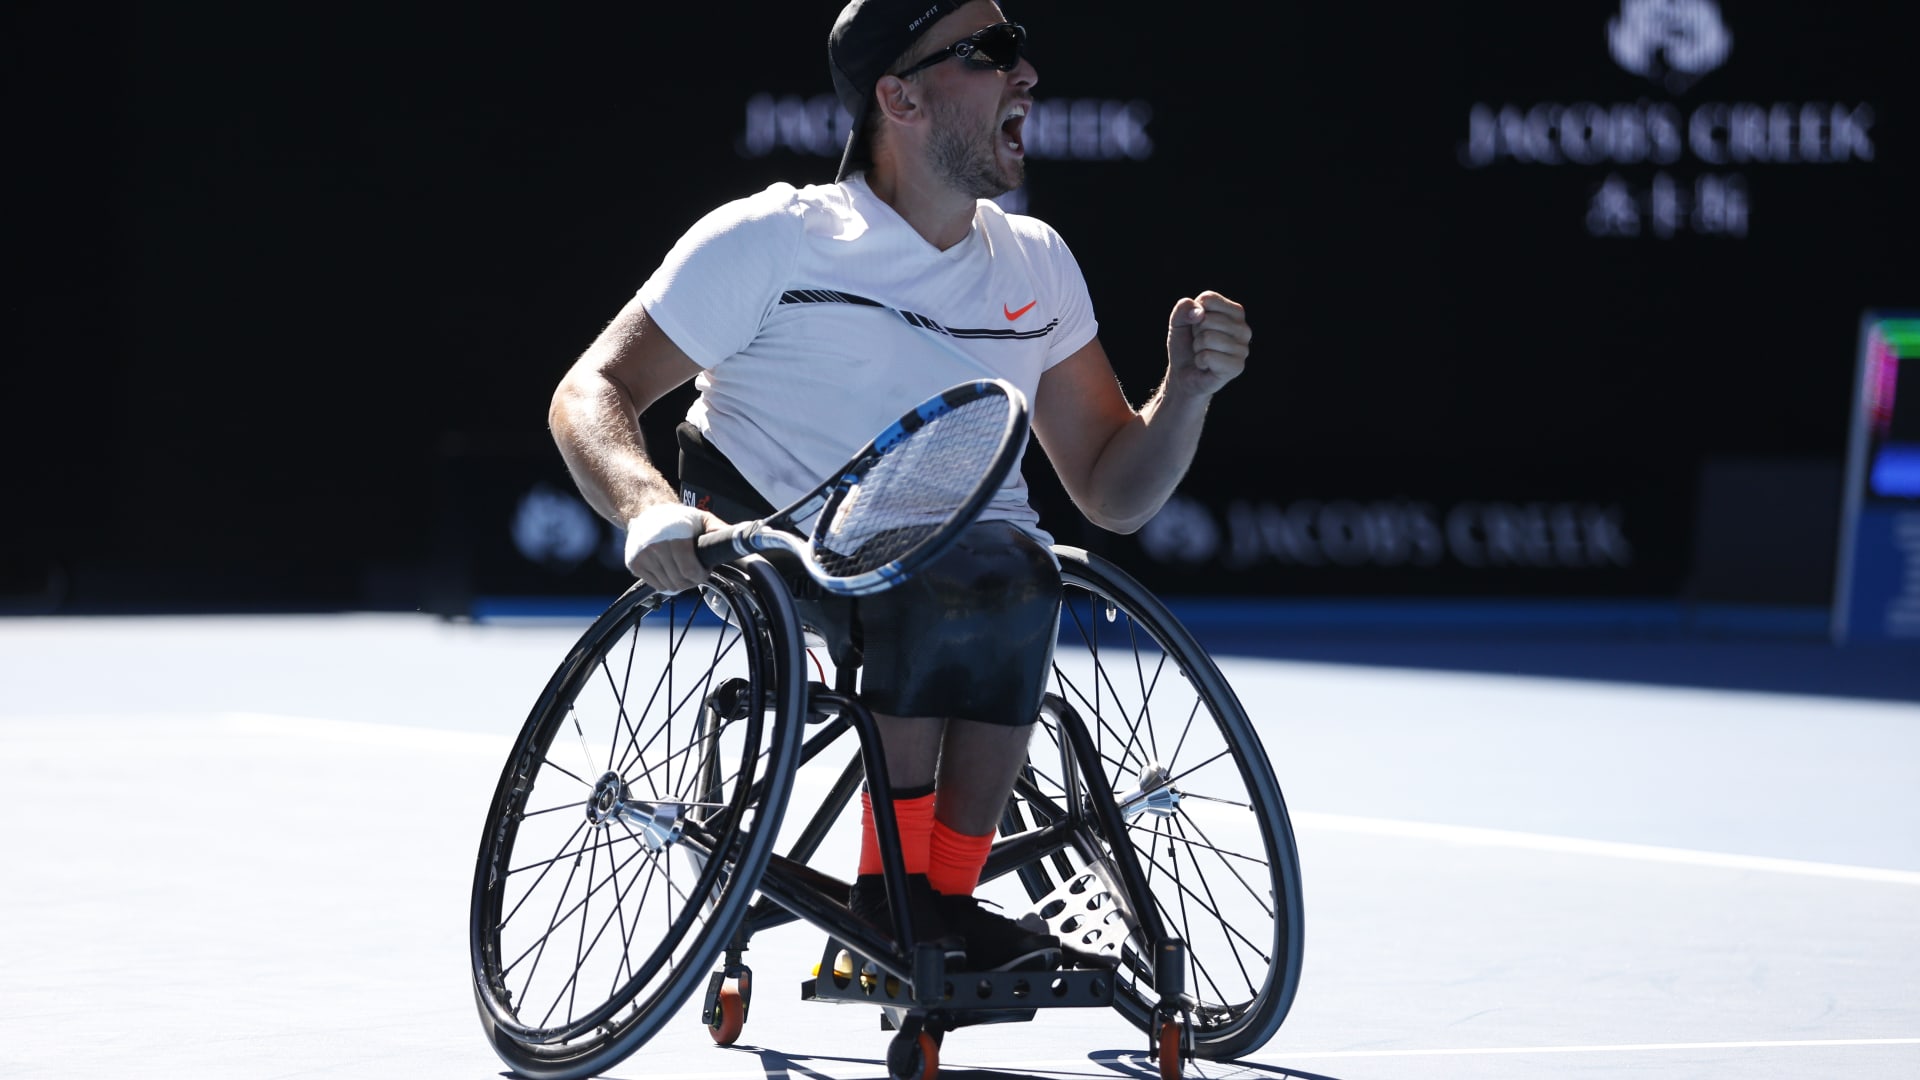 Dylan Alcott wont stop fighting for recognition of disabled athletes